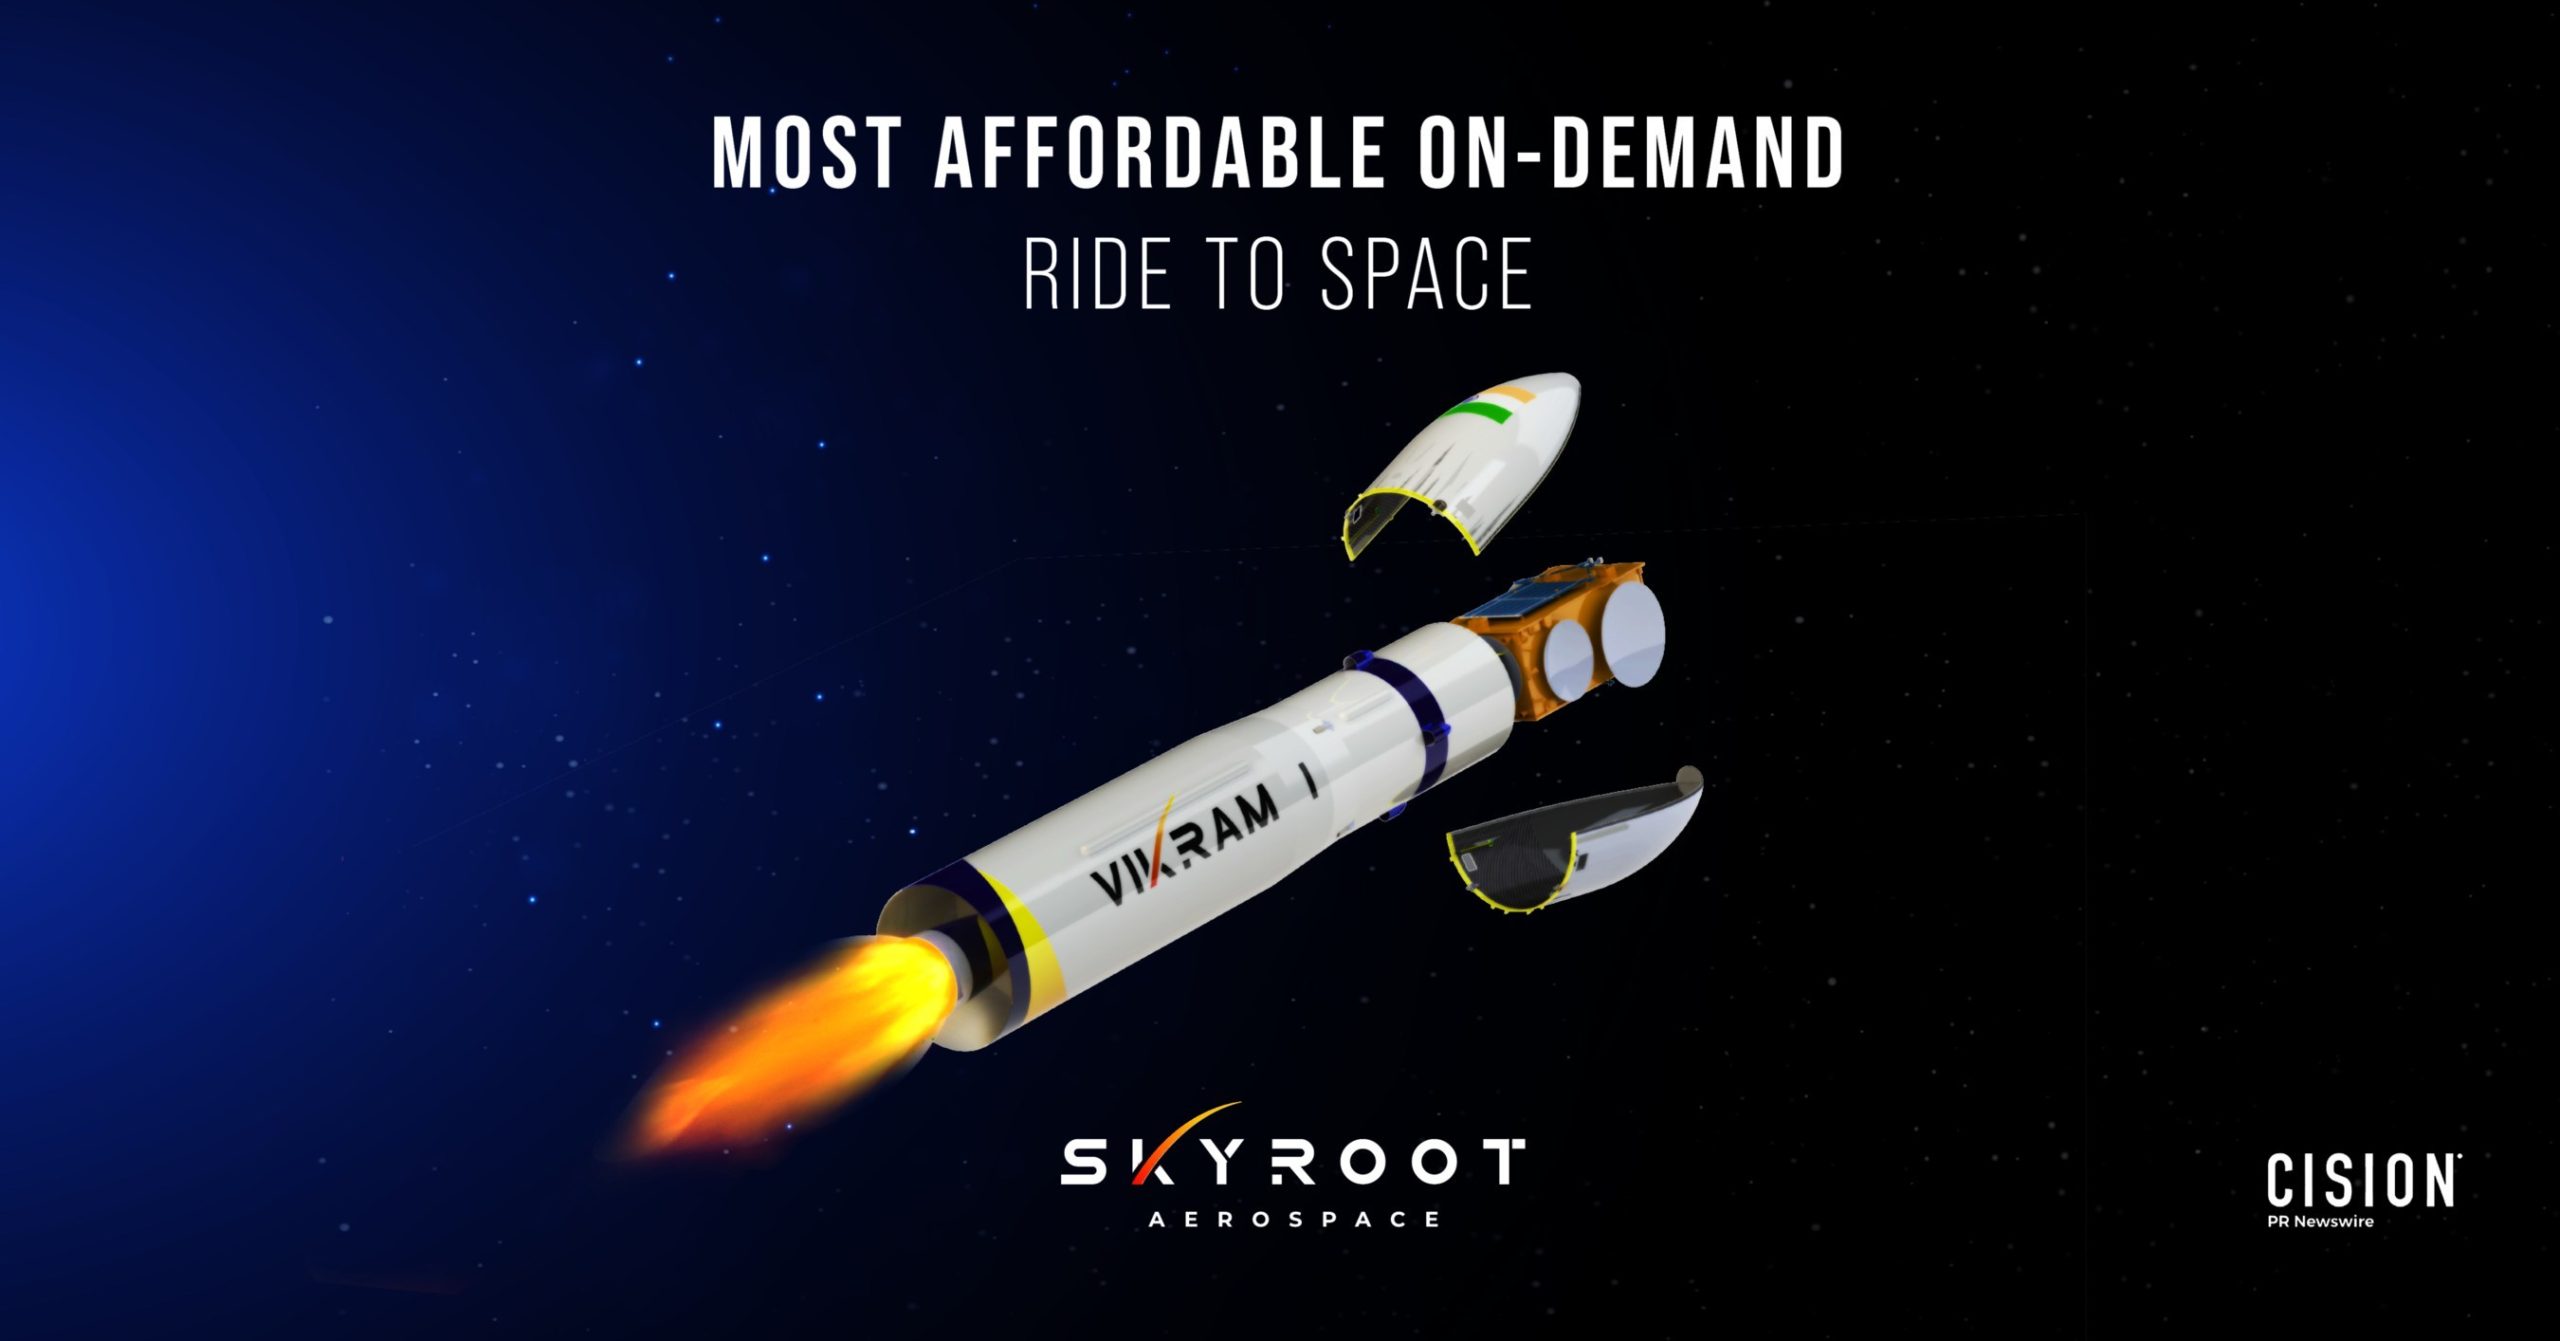 India’s Skyroot launches low-cost mini rocket into space